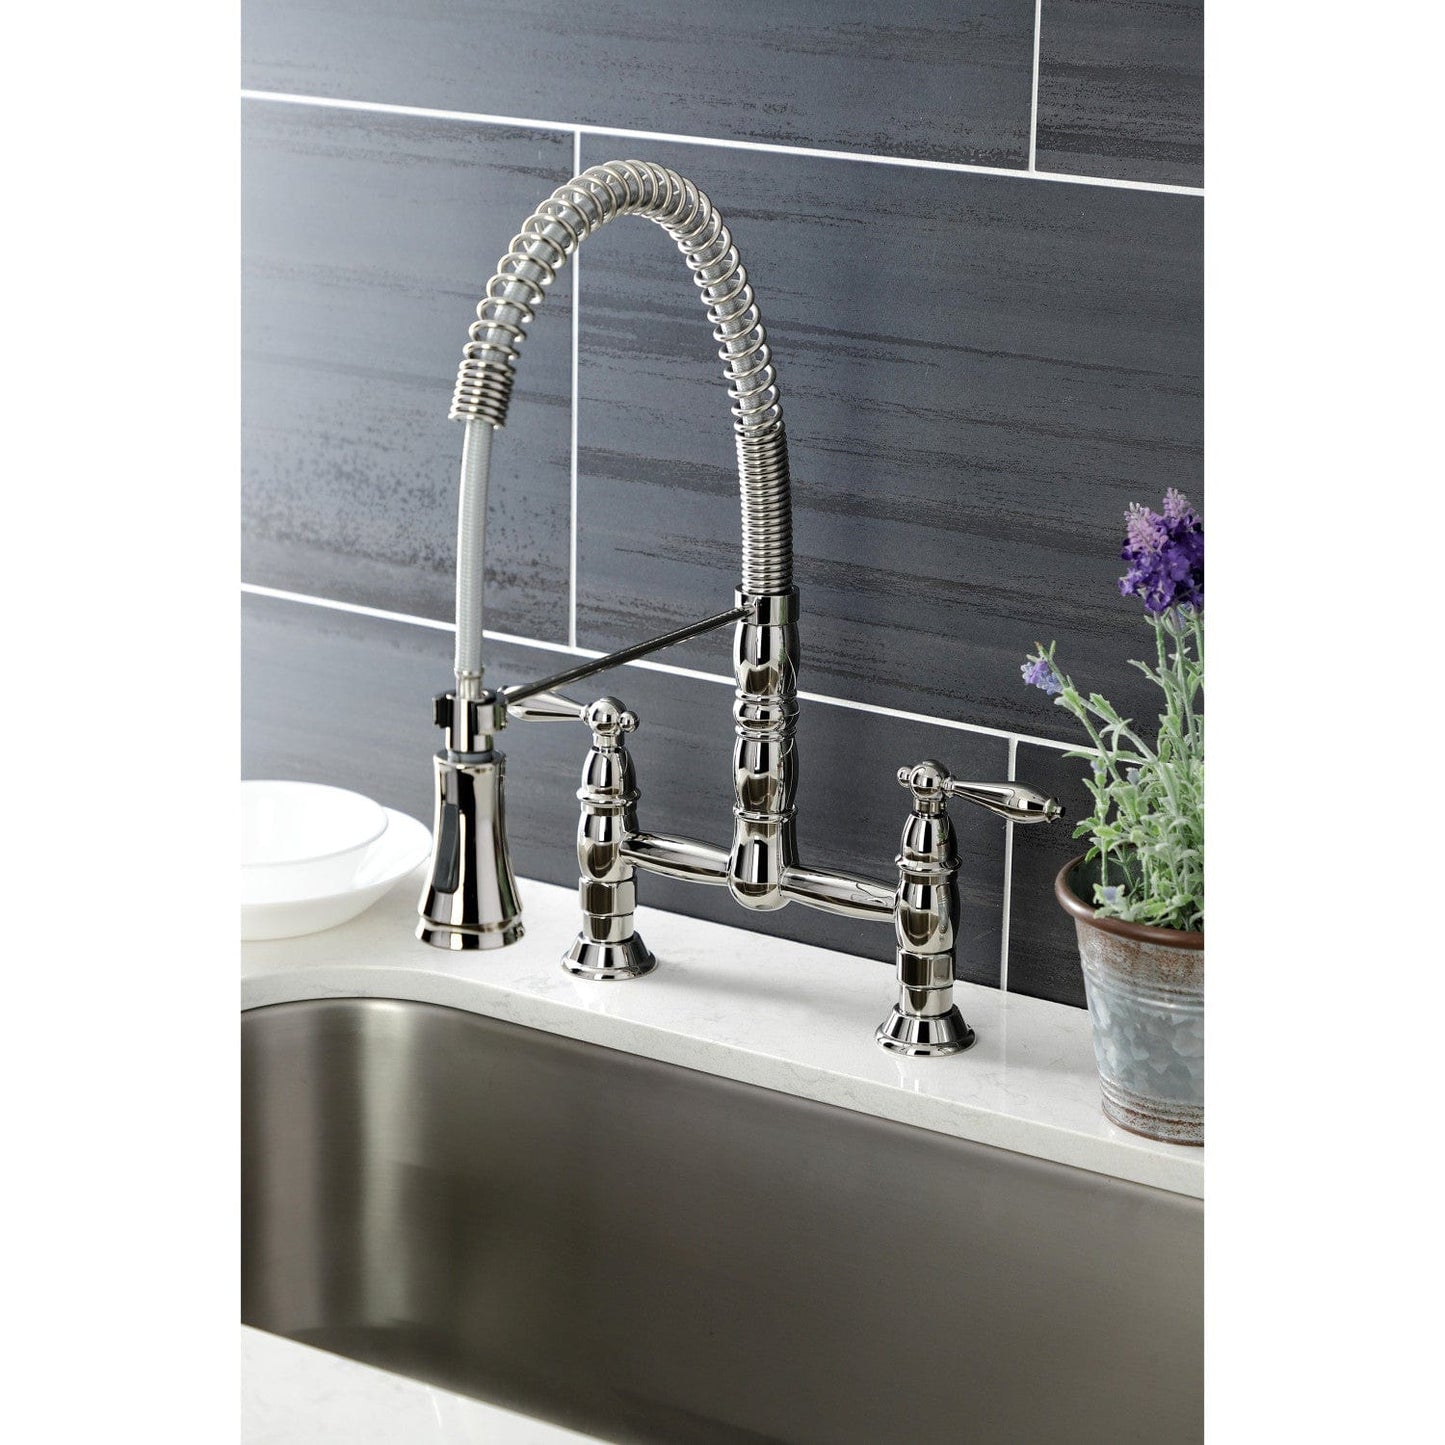 KINGSTON Brass Gourmetier Heritage Two-Handle Kitchen Faucet - Polished Nickel